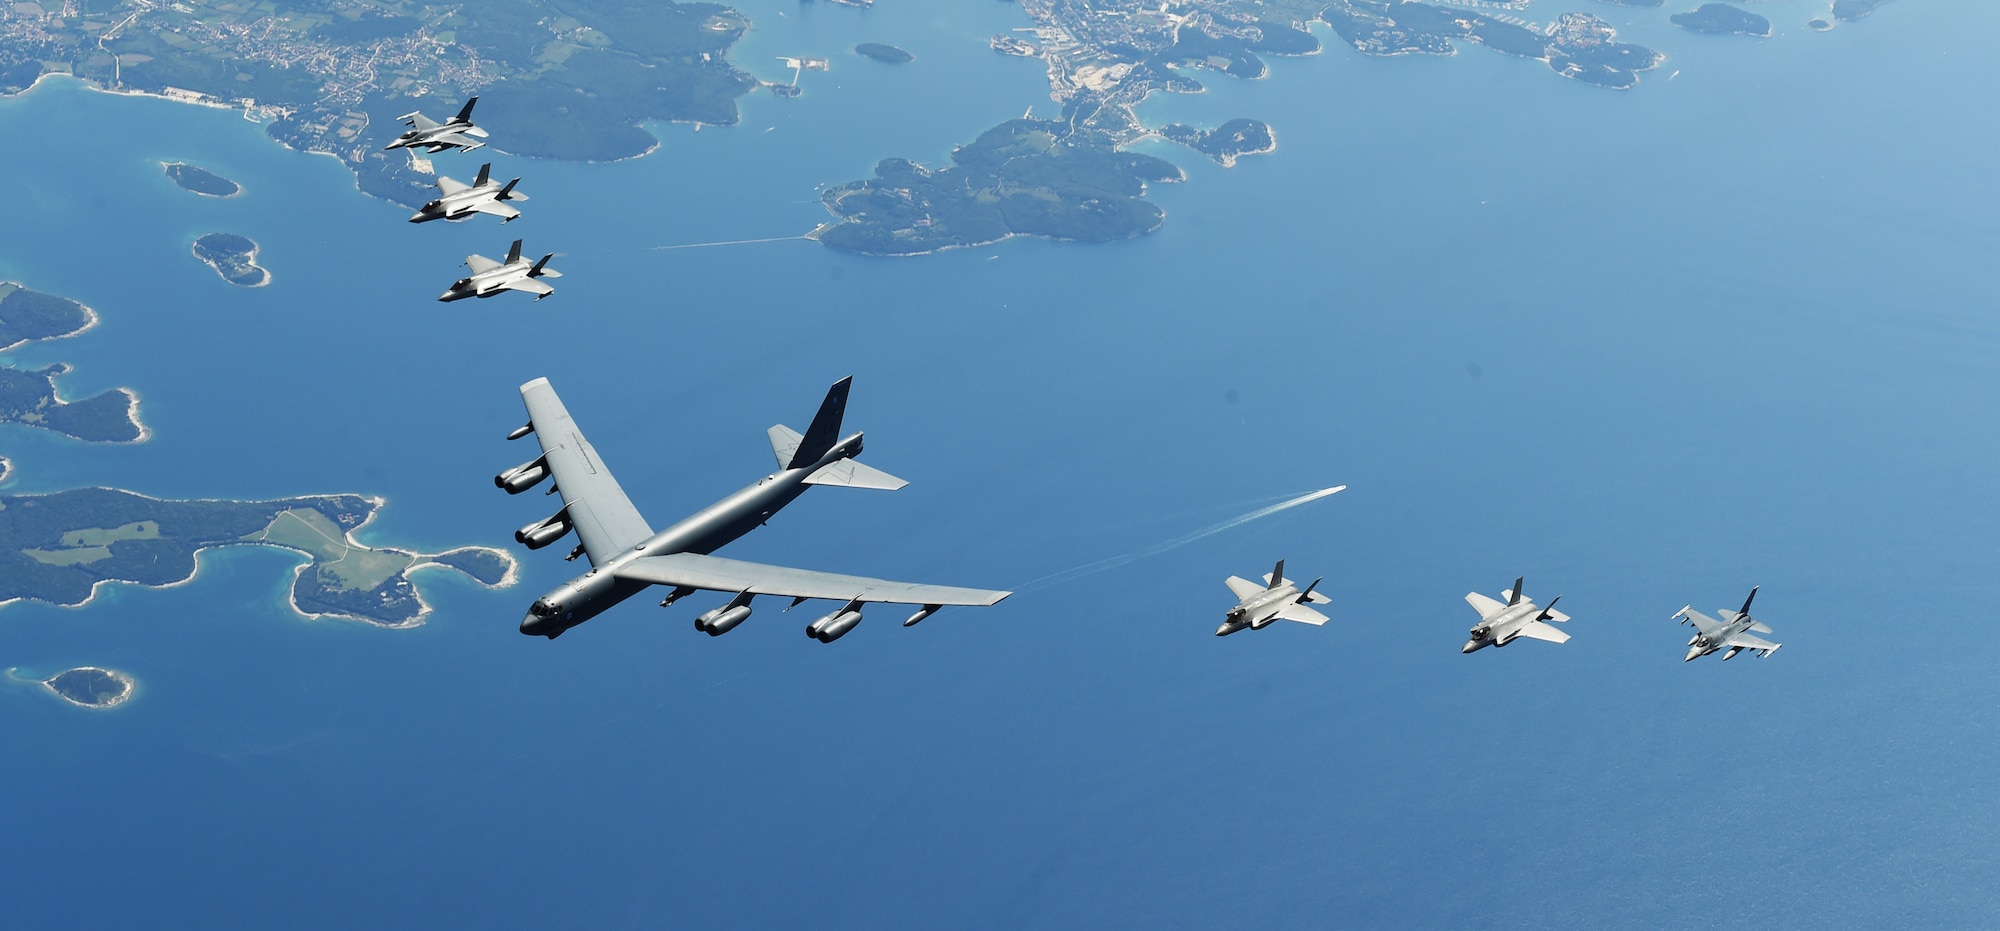 U.S. and Italian Air Force aircraft fly in formation over the Adriatic Sea